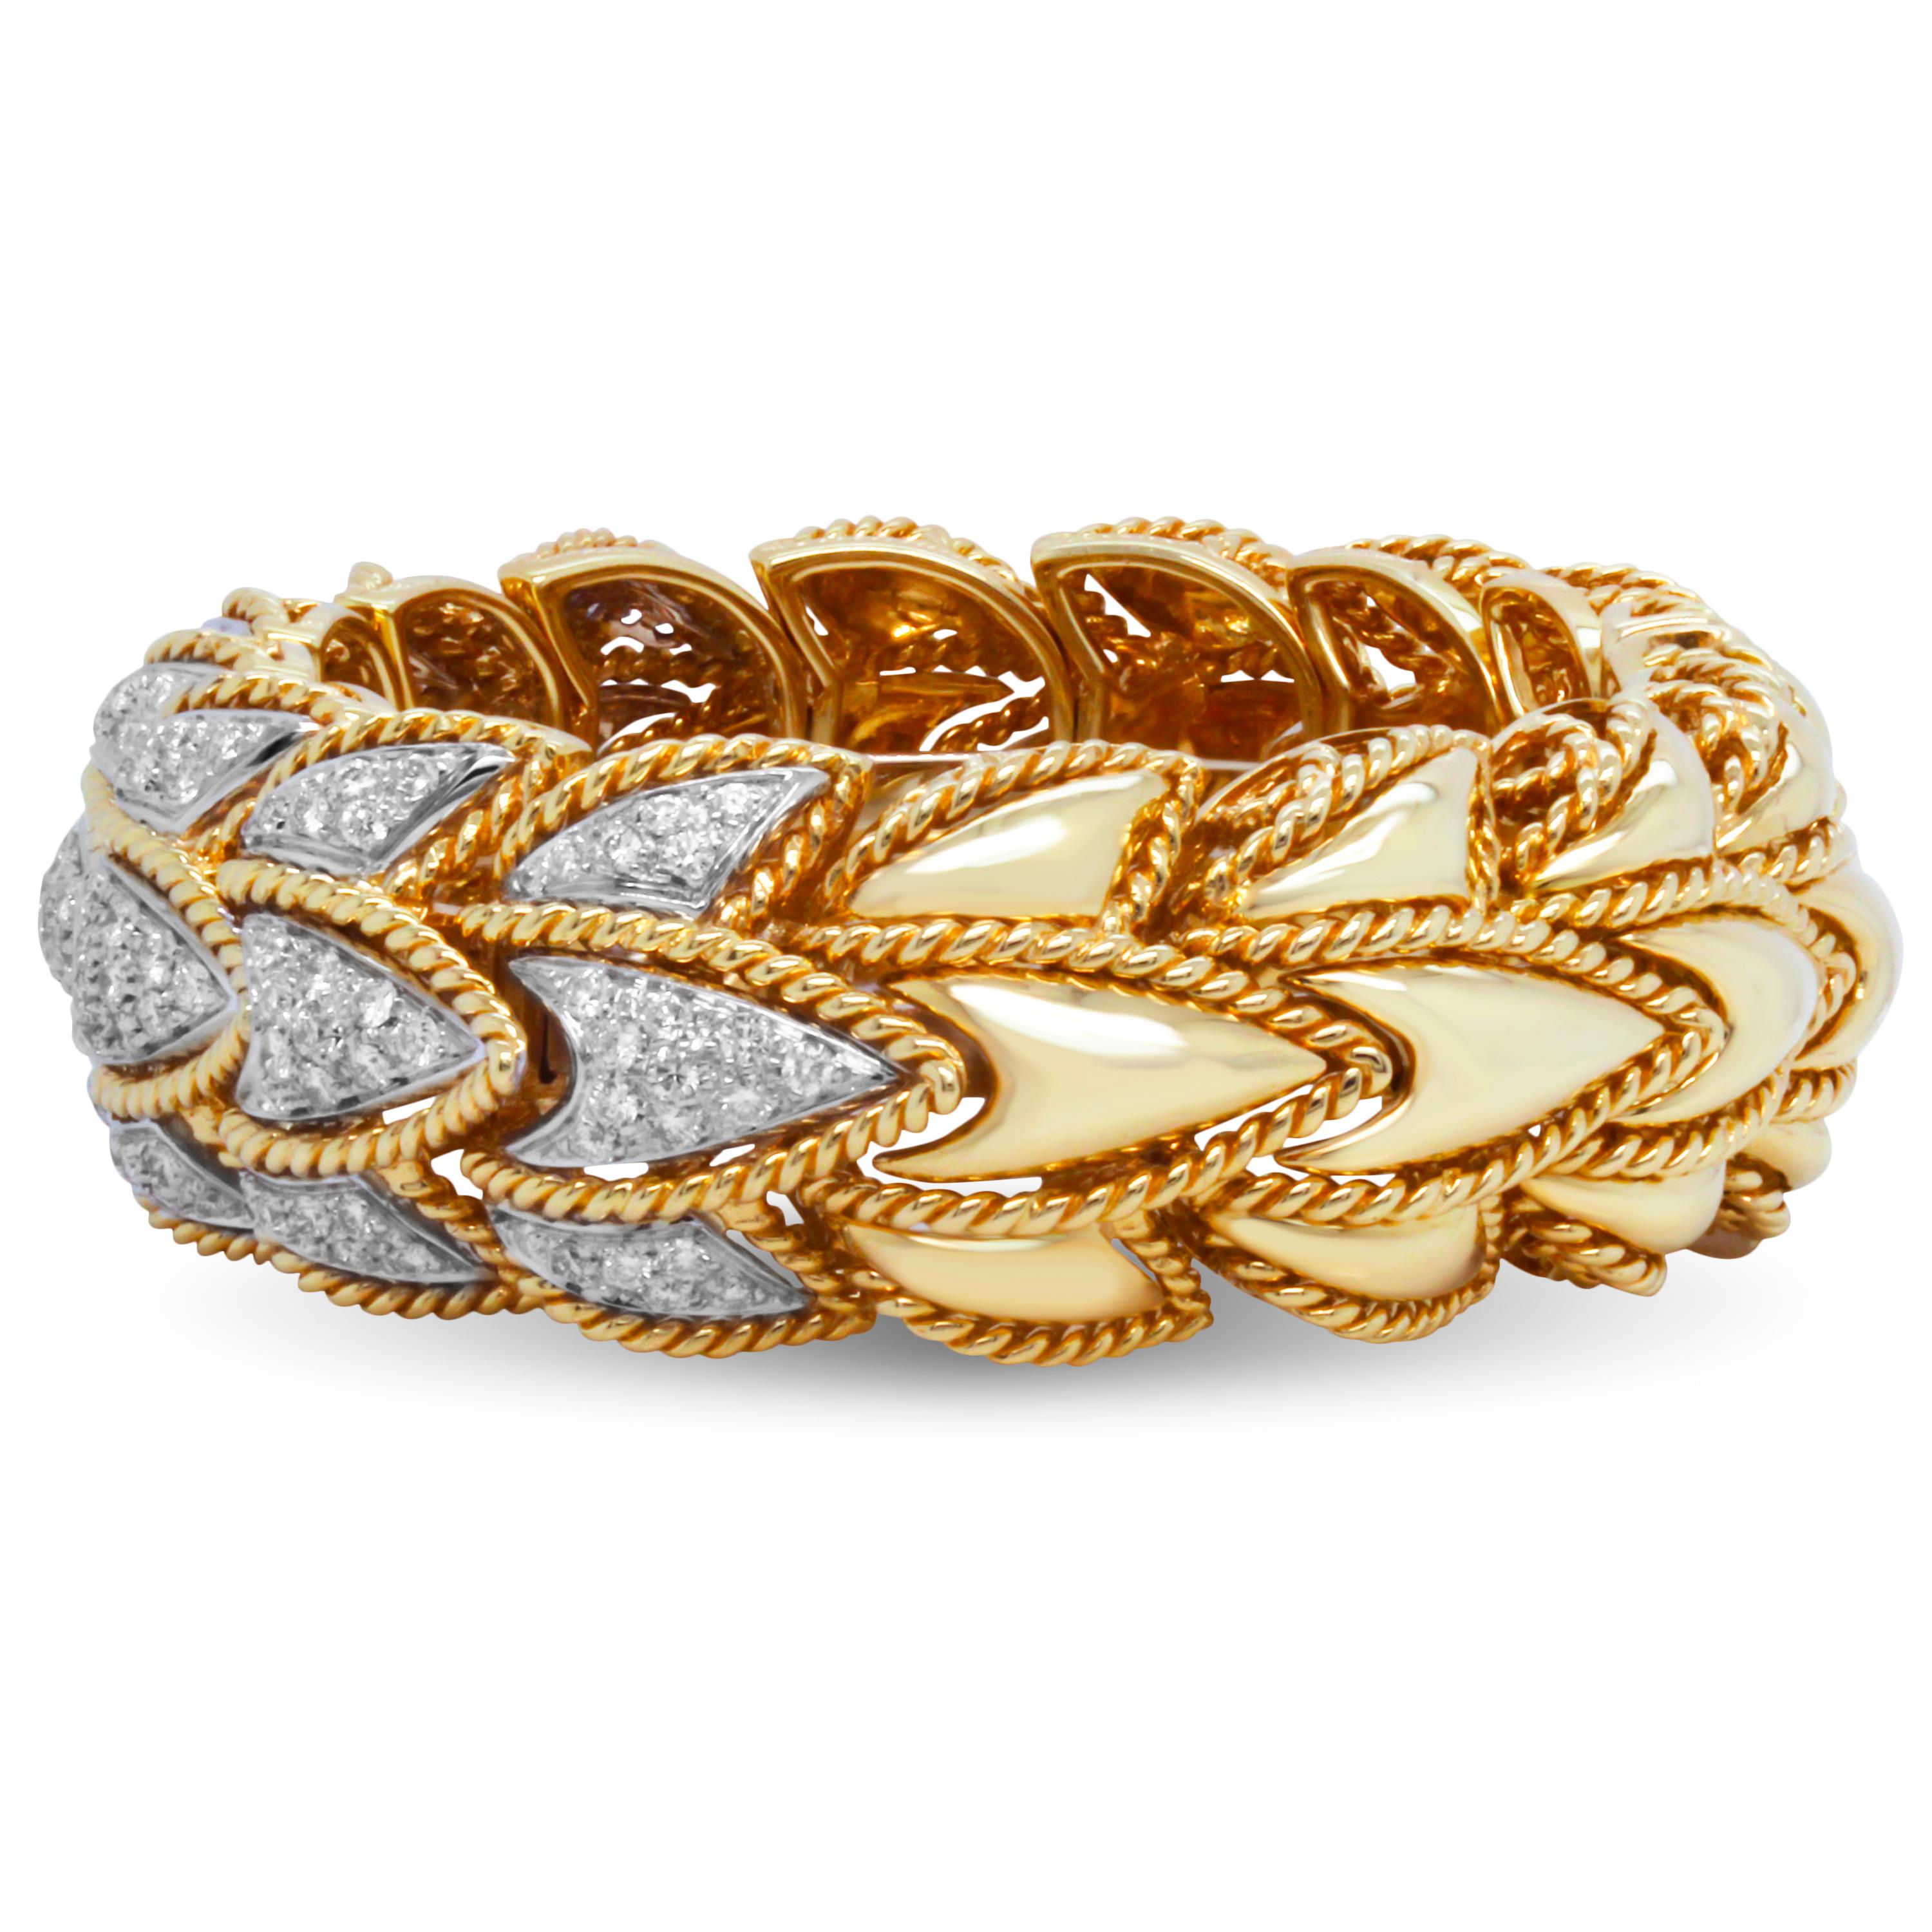 18k Yellow and White Gold Bangle Bracelet with Diamonds

This beautiful two-tone gold bangle bracelet features a simple, yet unique design that gives it a distinct, luxurious look. The bracelet is slightly flexible and is open underneath. 

 Apprx.